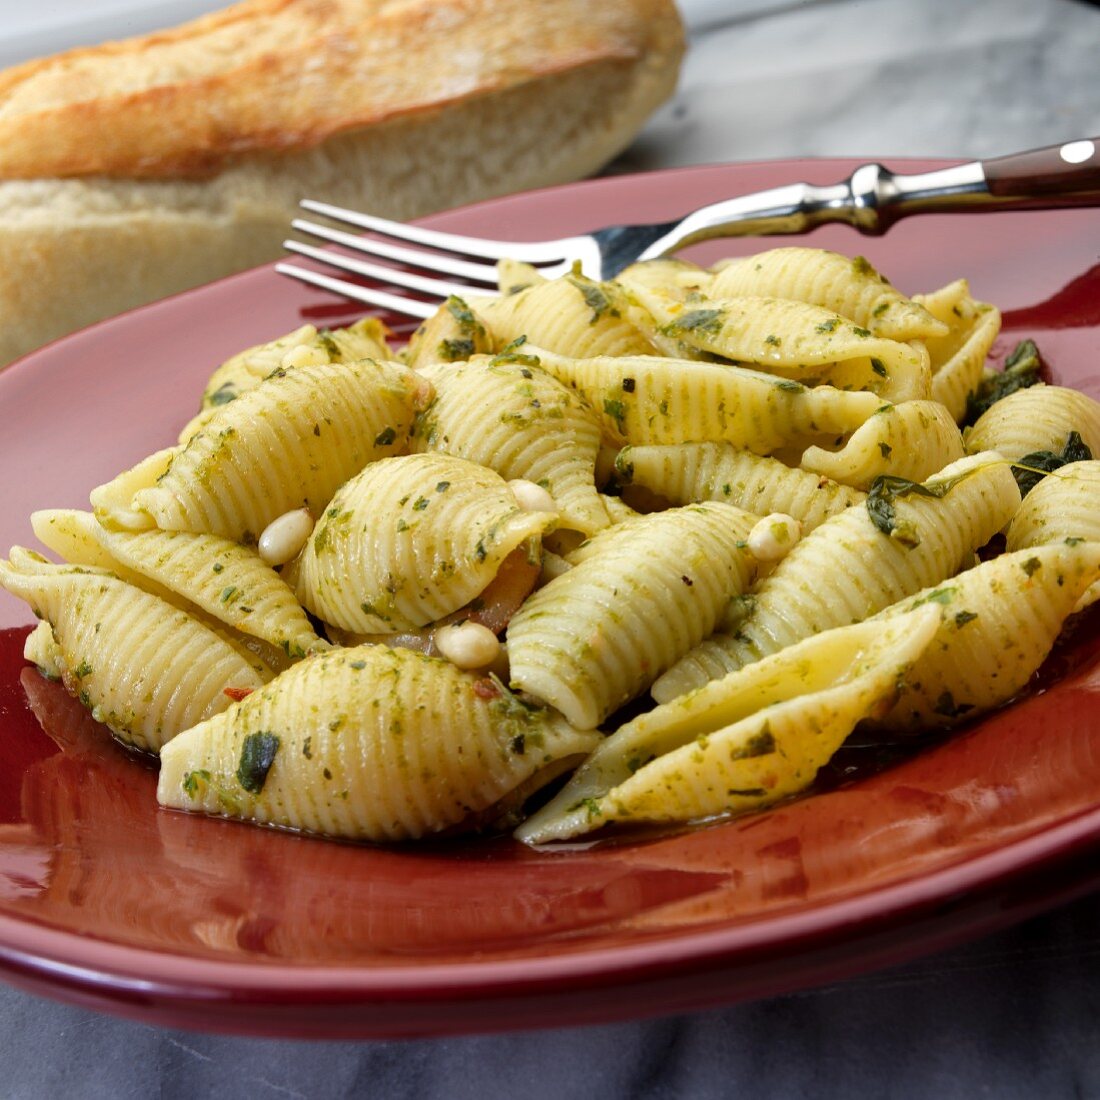 Large pasta shells with pesto and pine nuts